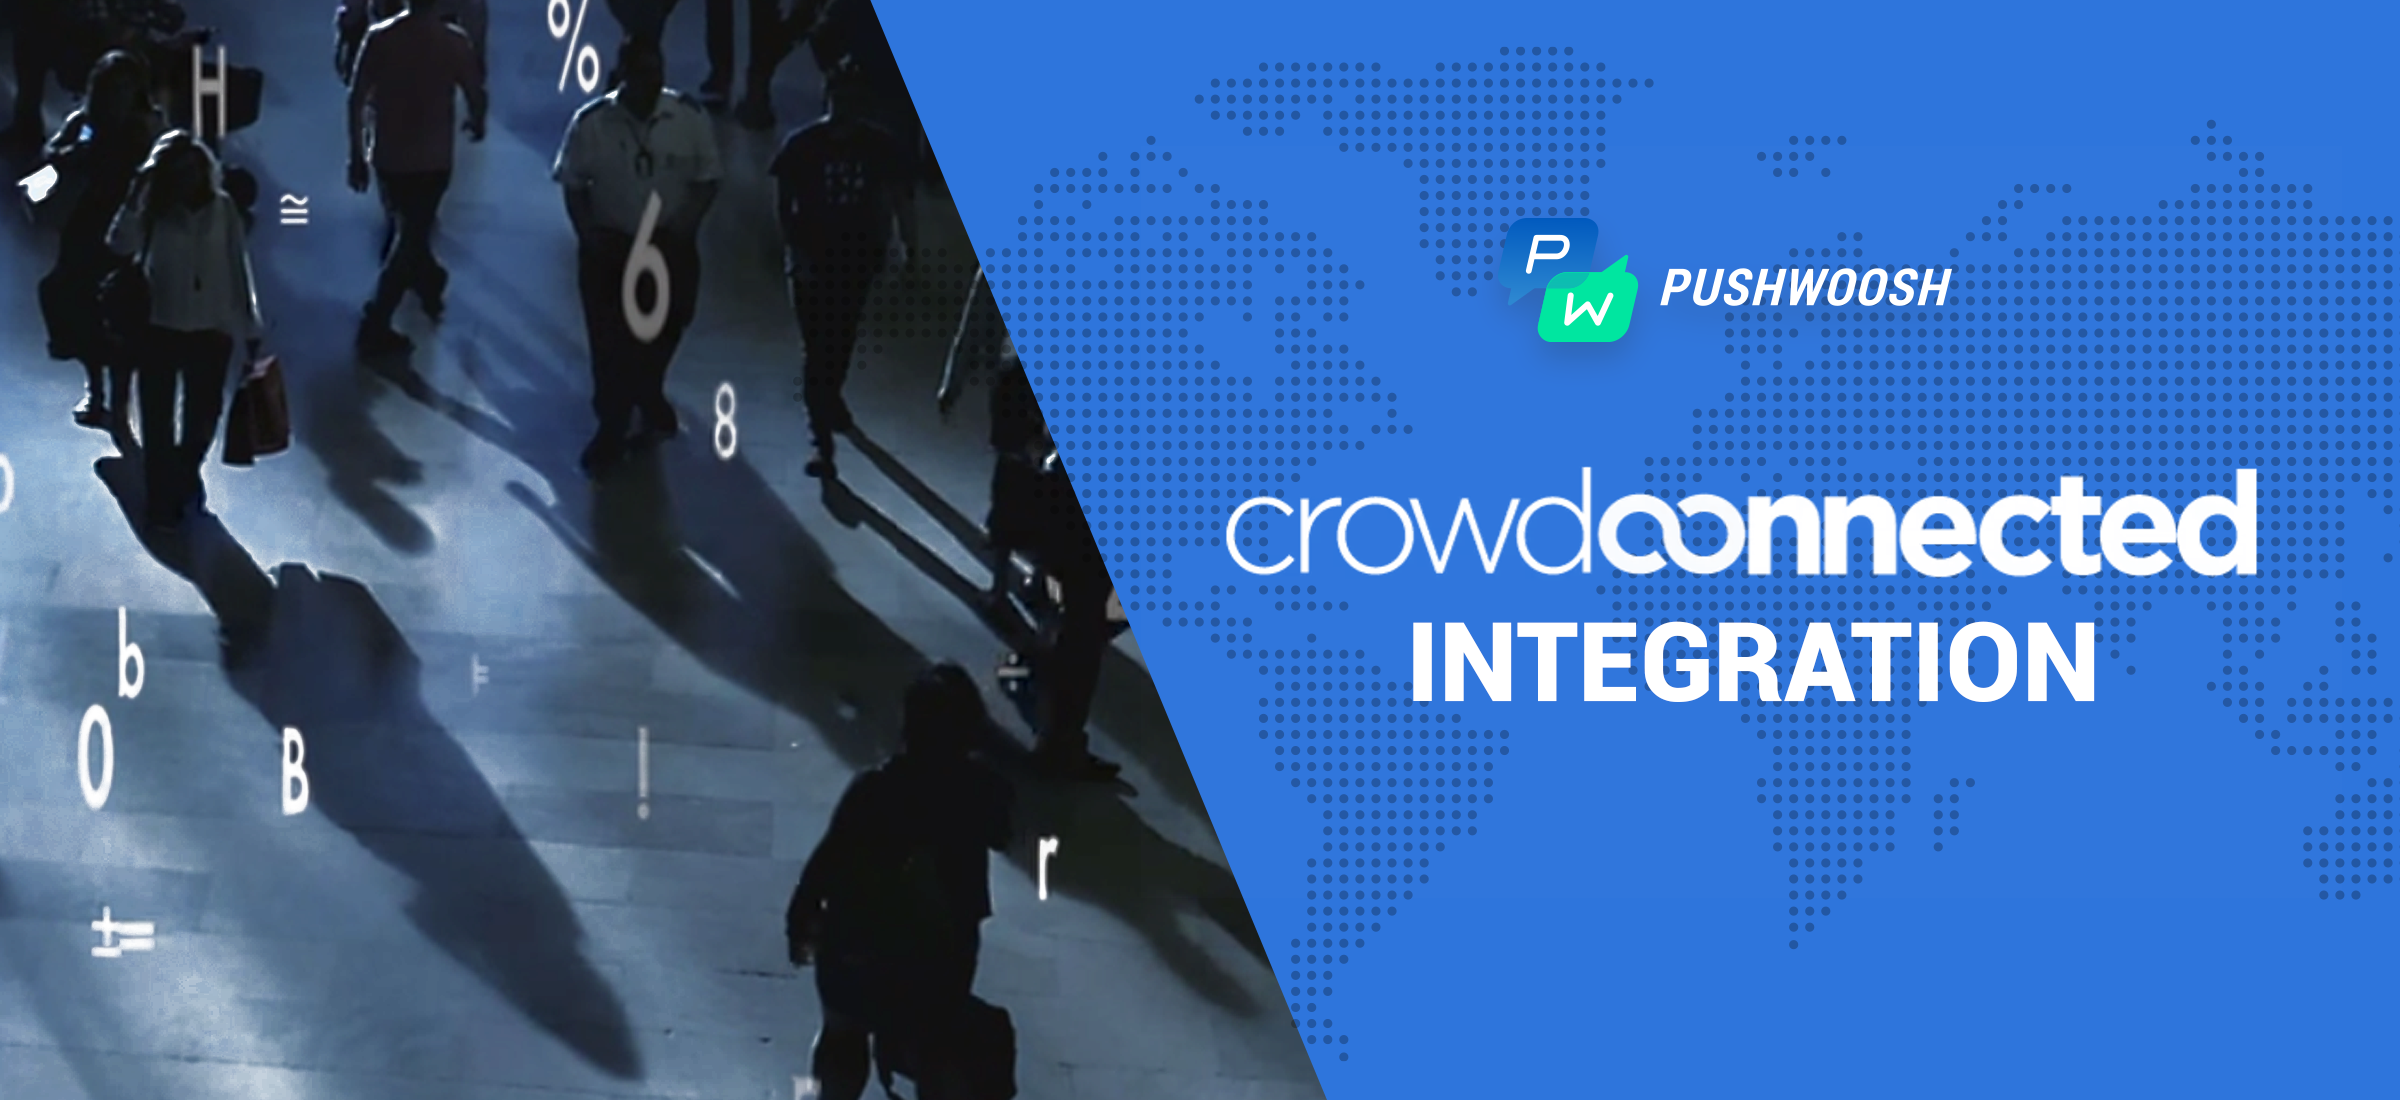 Welcome Geo-Behavioral Segmentation: Advanced Location Intelligence
with Crowd Connected